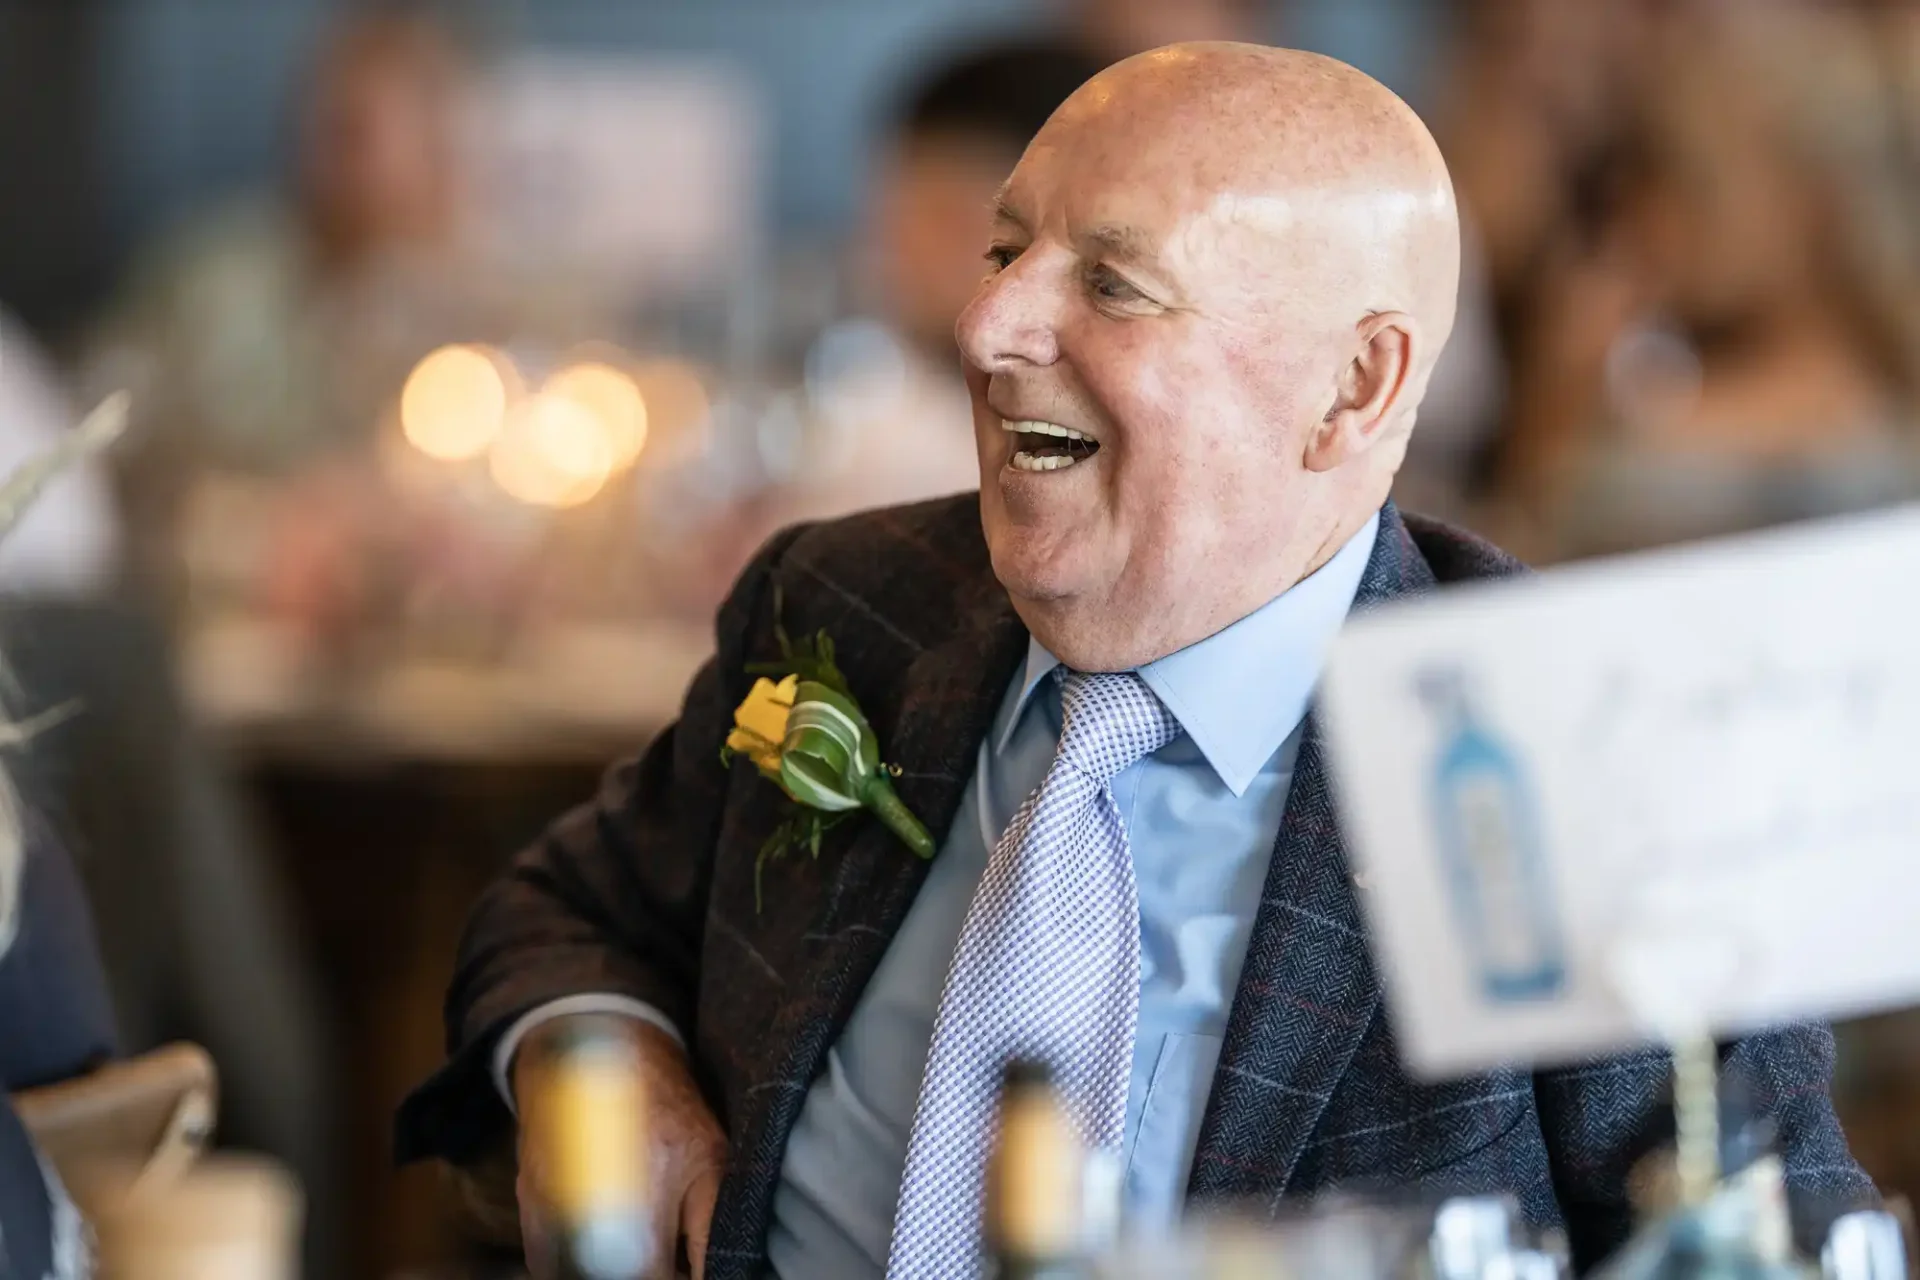 Elderly man in a suit with a boutonniere, laughing at a social event with other guests blurred in the background.